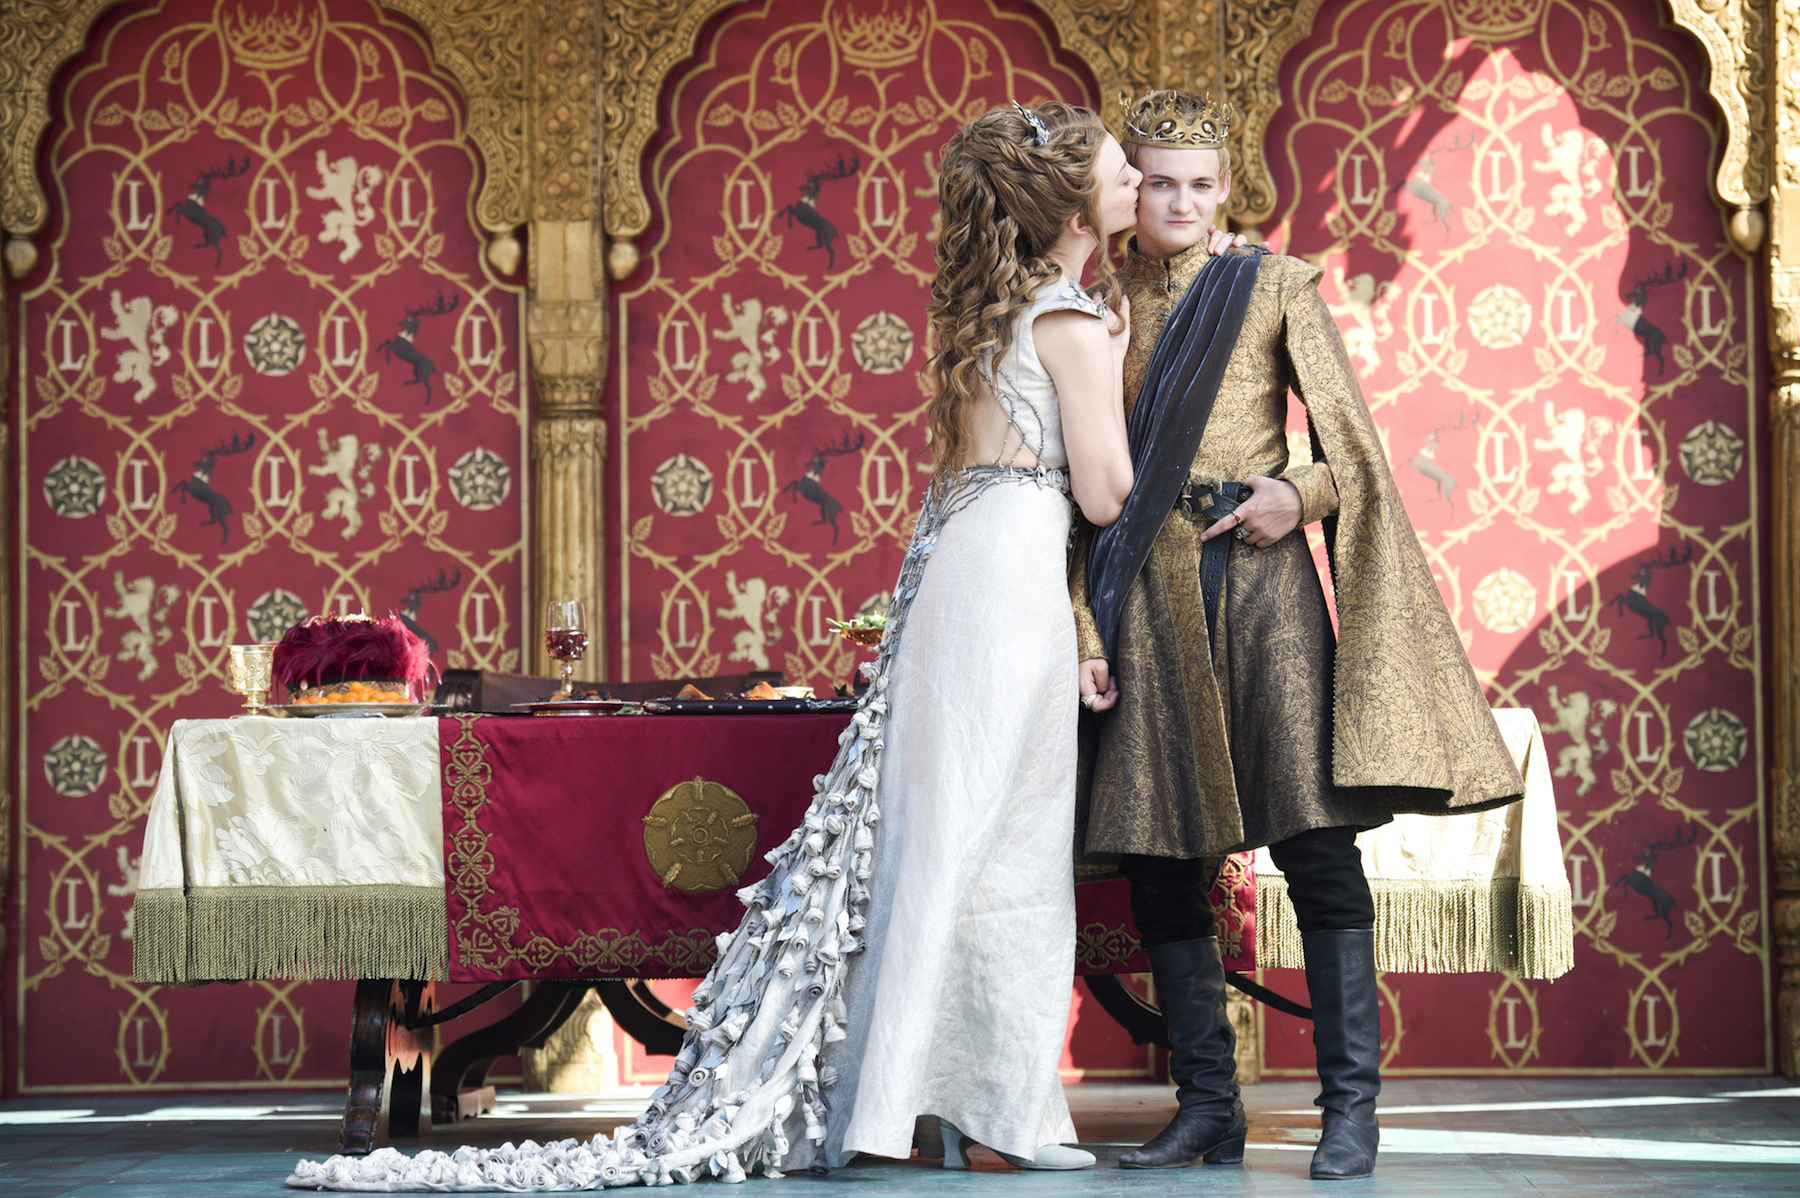 Torrnet Game Of Thrones Game of Thrones Torrent Download Share Rate Breaks Record | Time